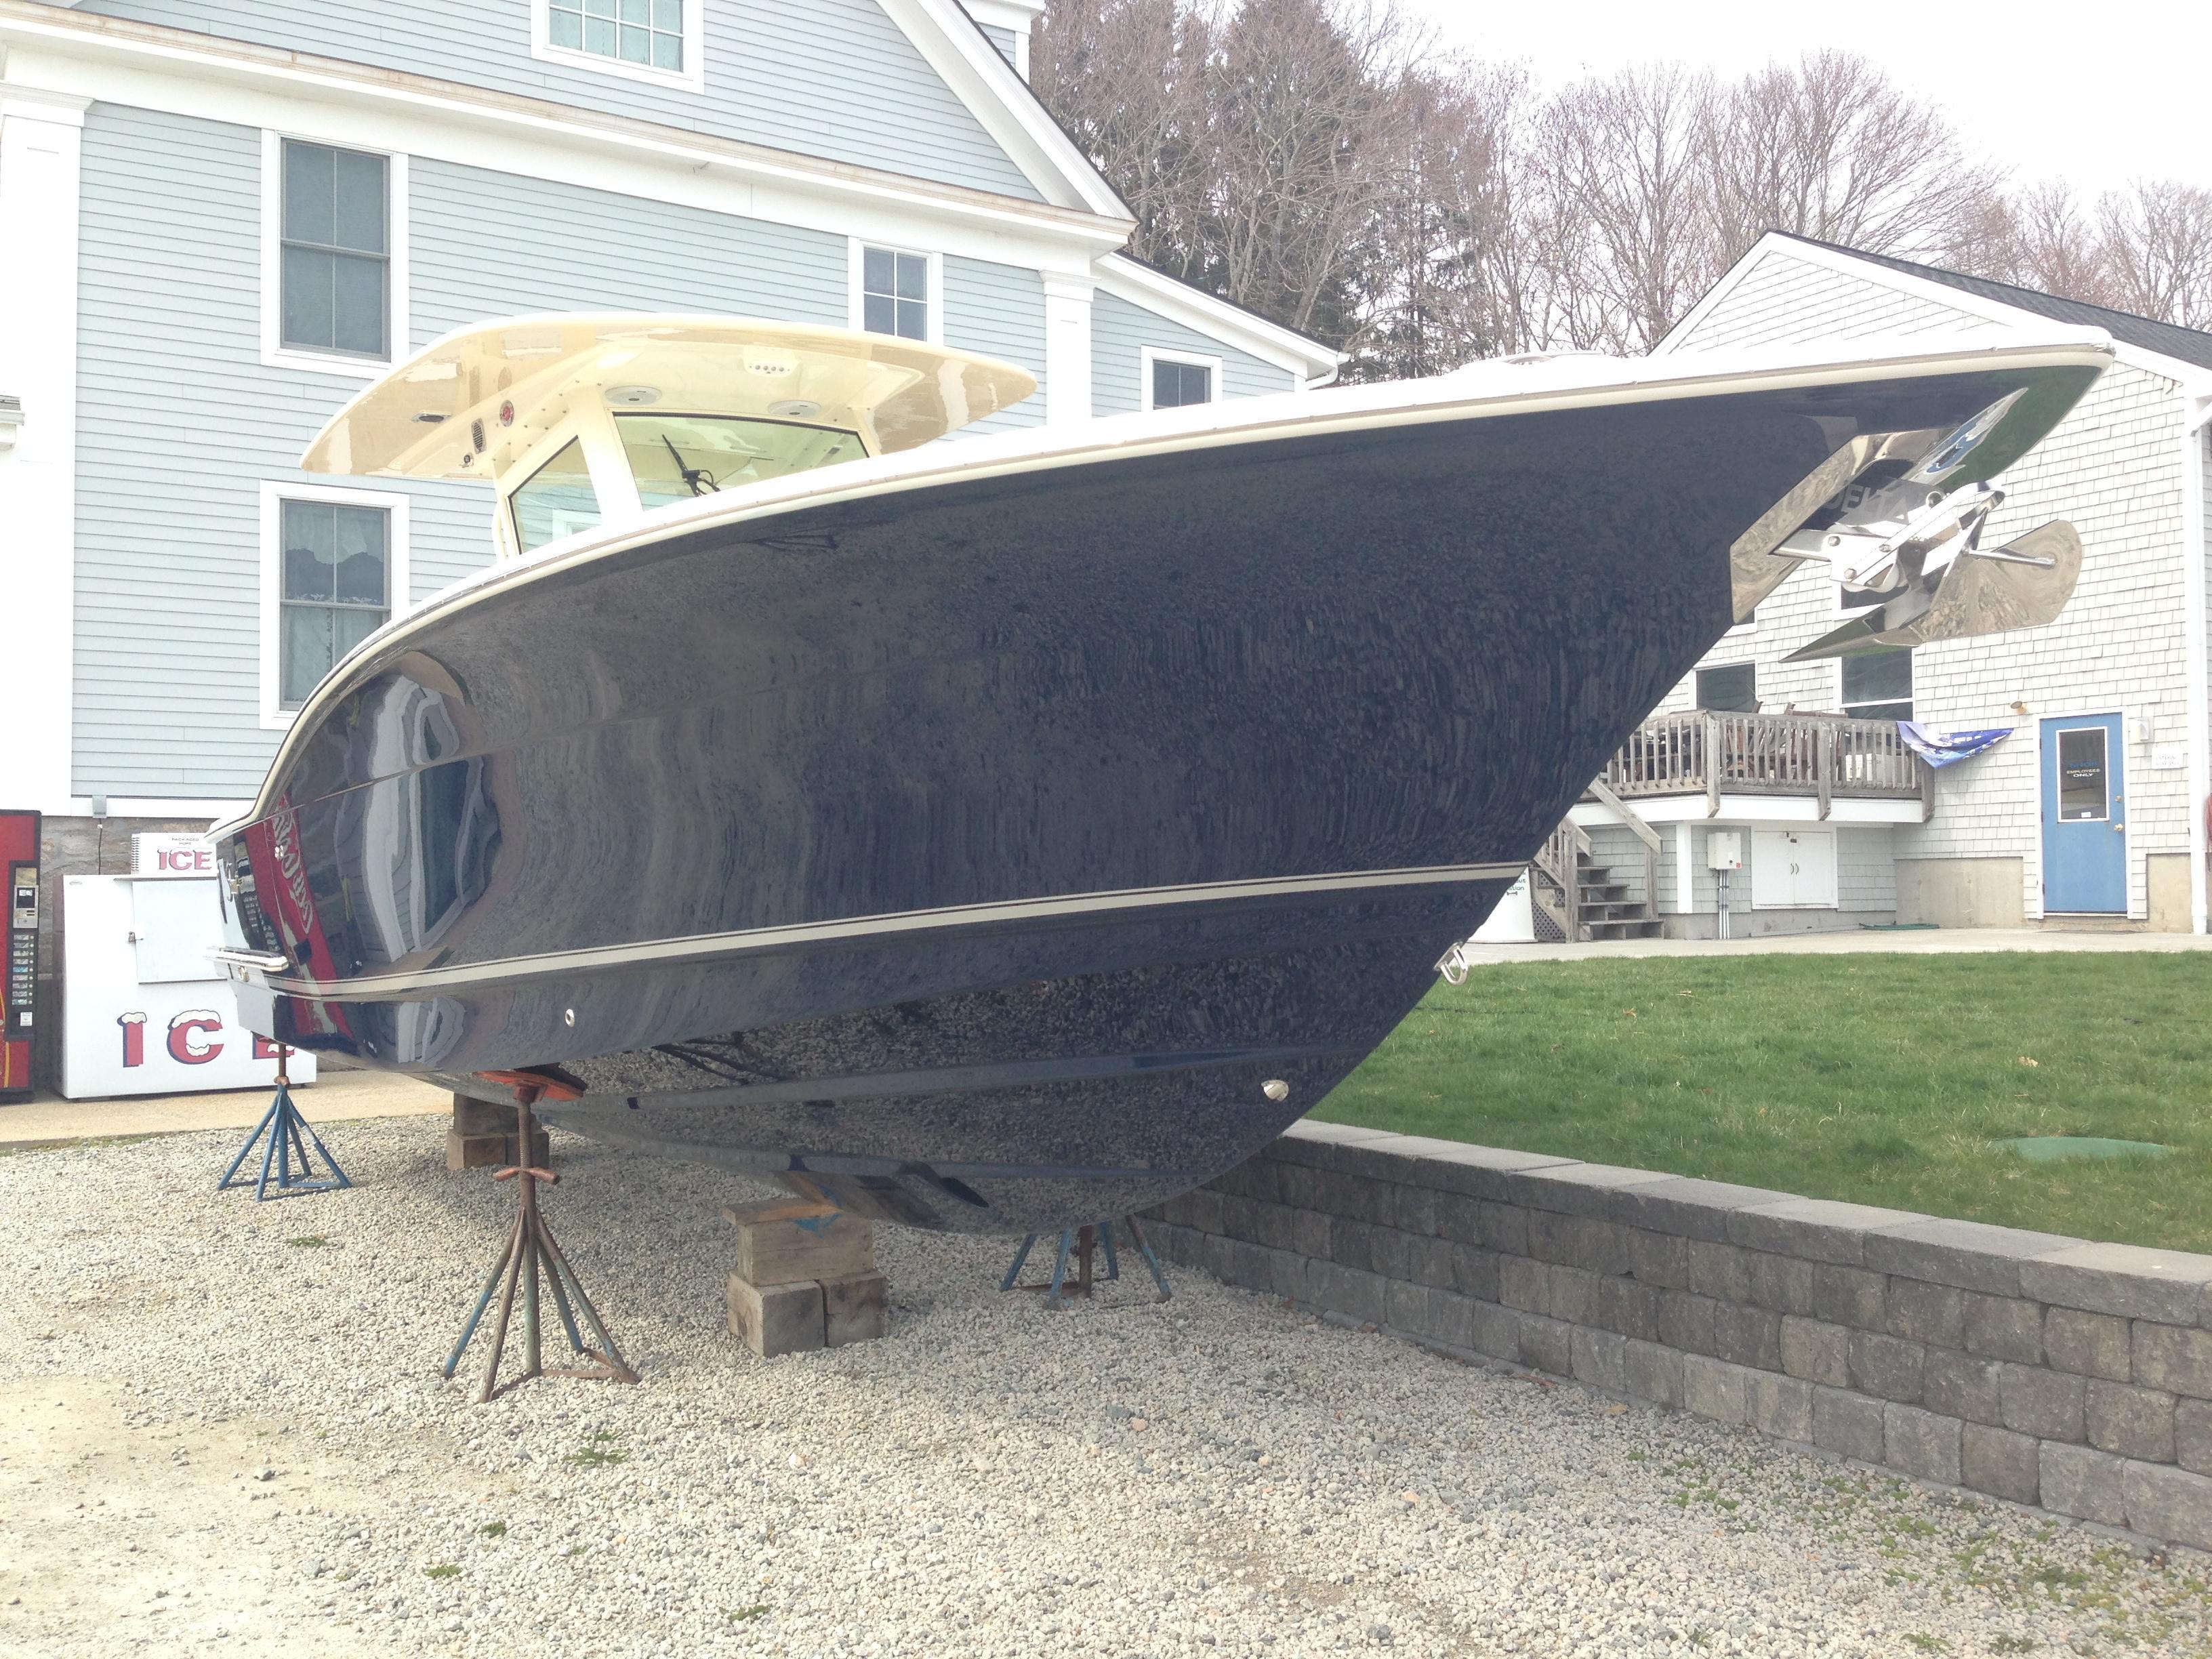 Scout Boats 320 LXF, Charlestown